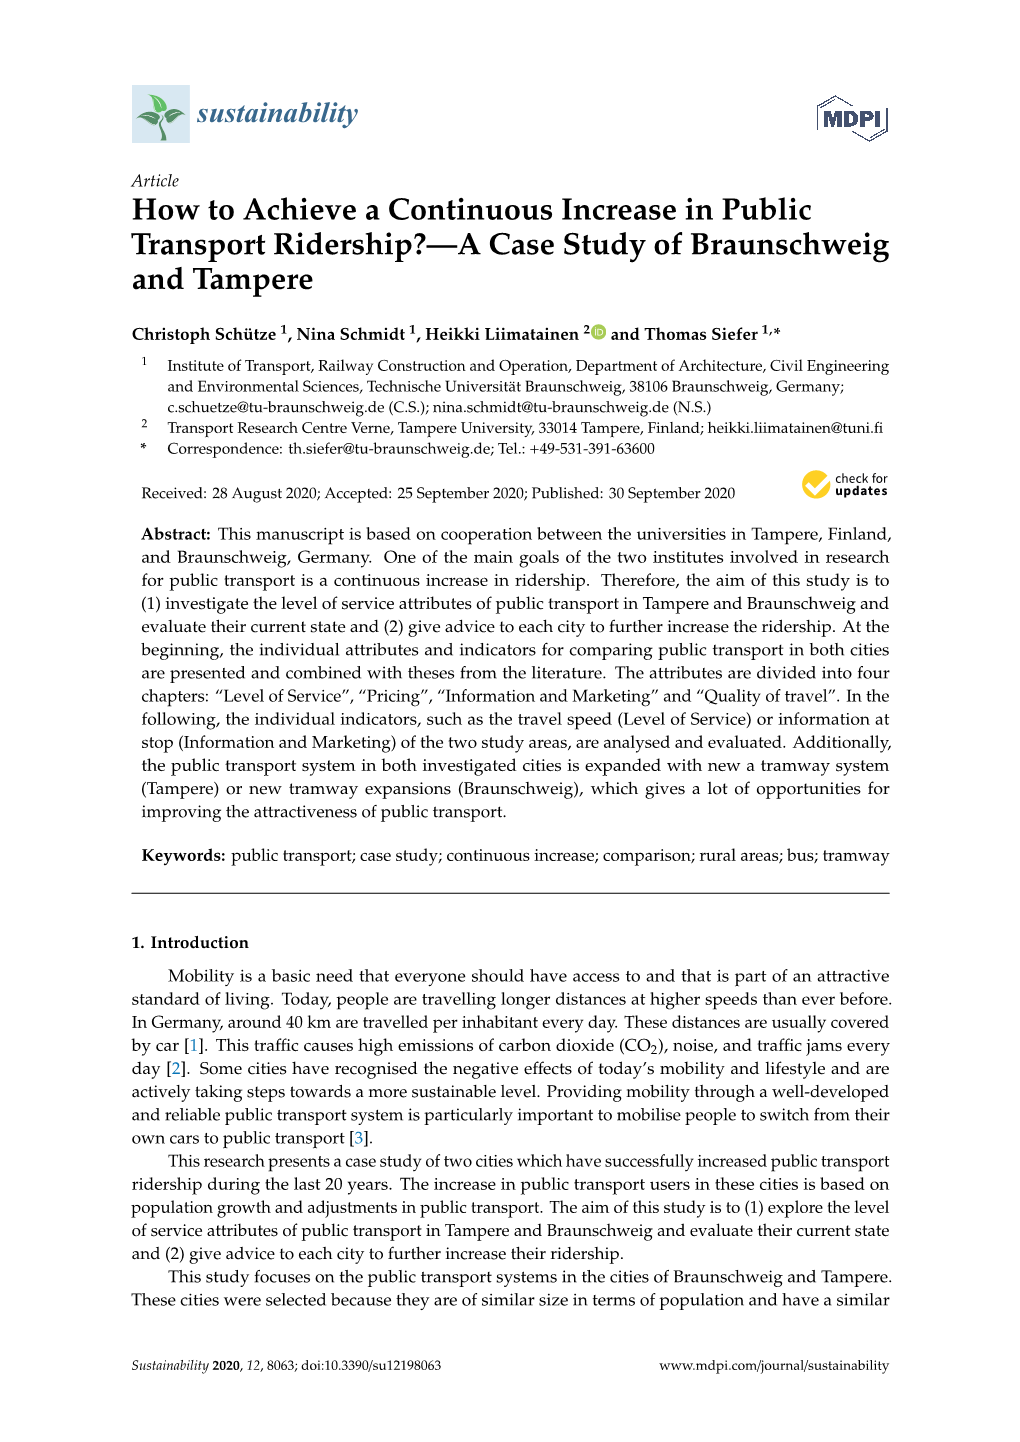 How to Achieve a Continuous Increase in Public Transport Ridership?—A Case Study of Braunschweig and Tampere